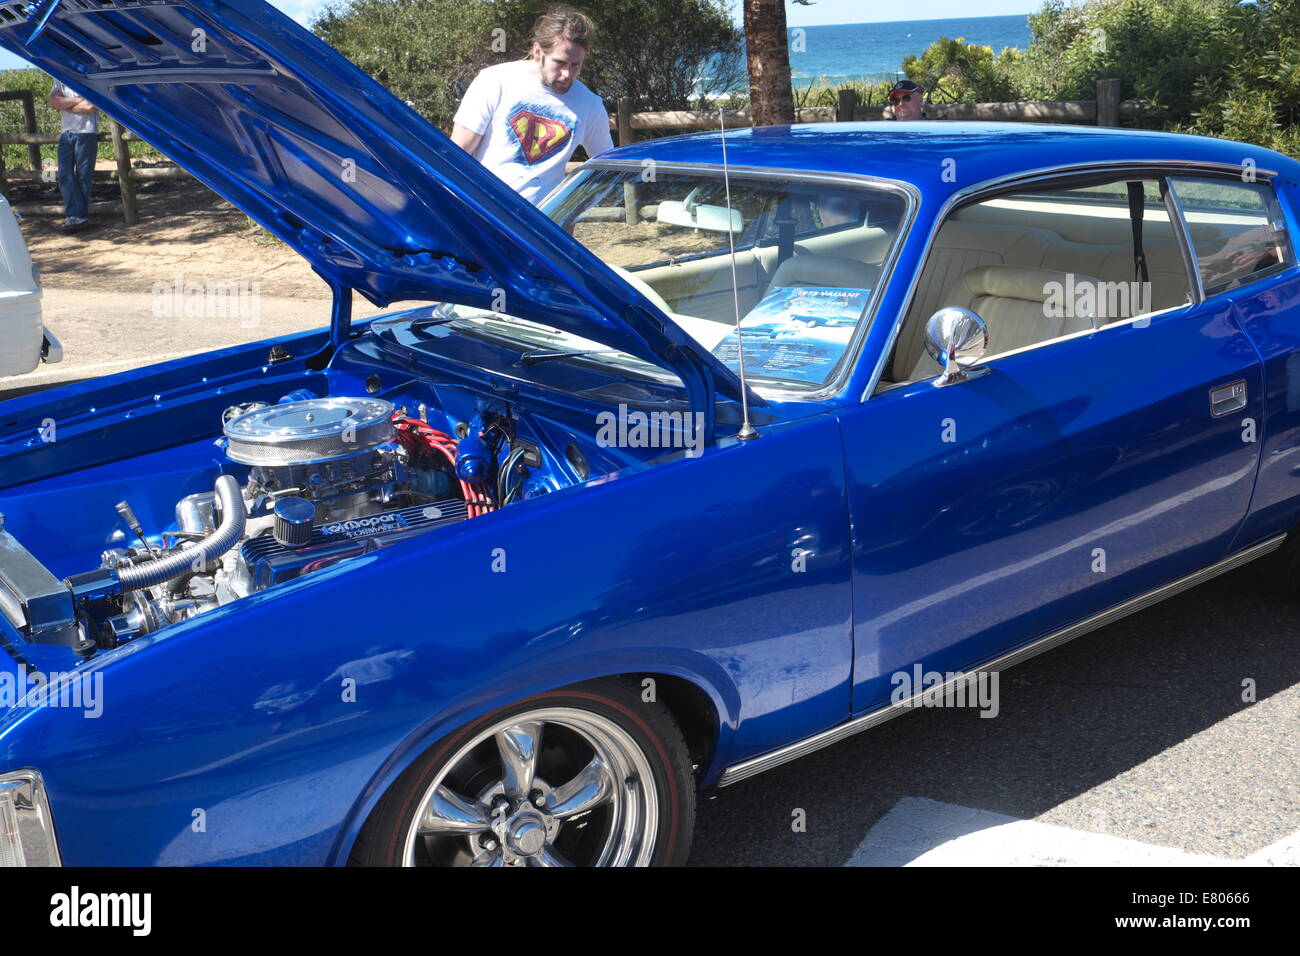 Newport Beach, Sydney, Australia. 27th Sep, 2014. Classic cars on display at Sydney's Newport Beach. Here a 1973 valiant charger. Credit:  martin berry/Alamy Live News Stock Photo